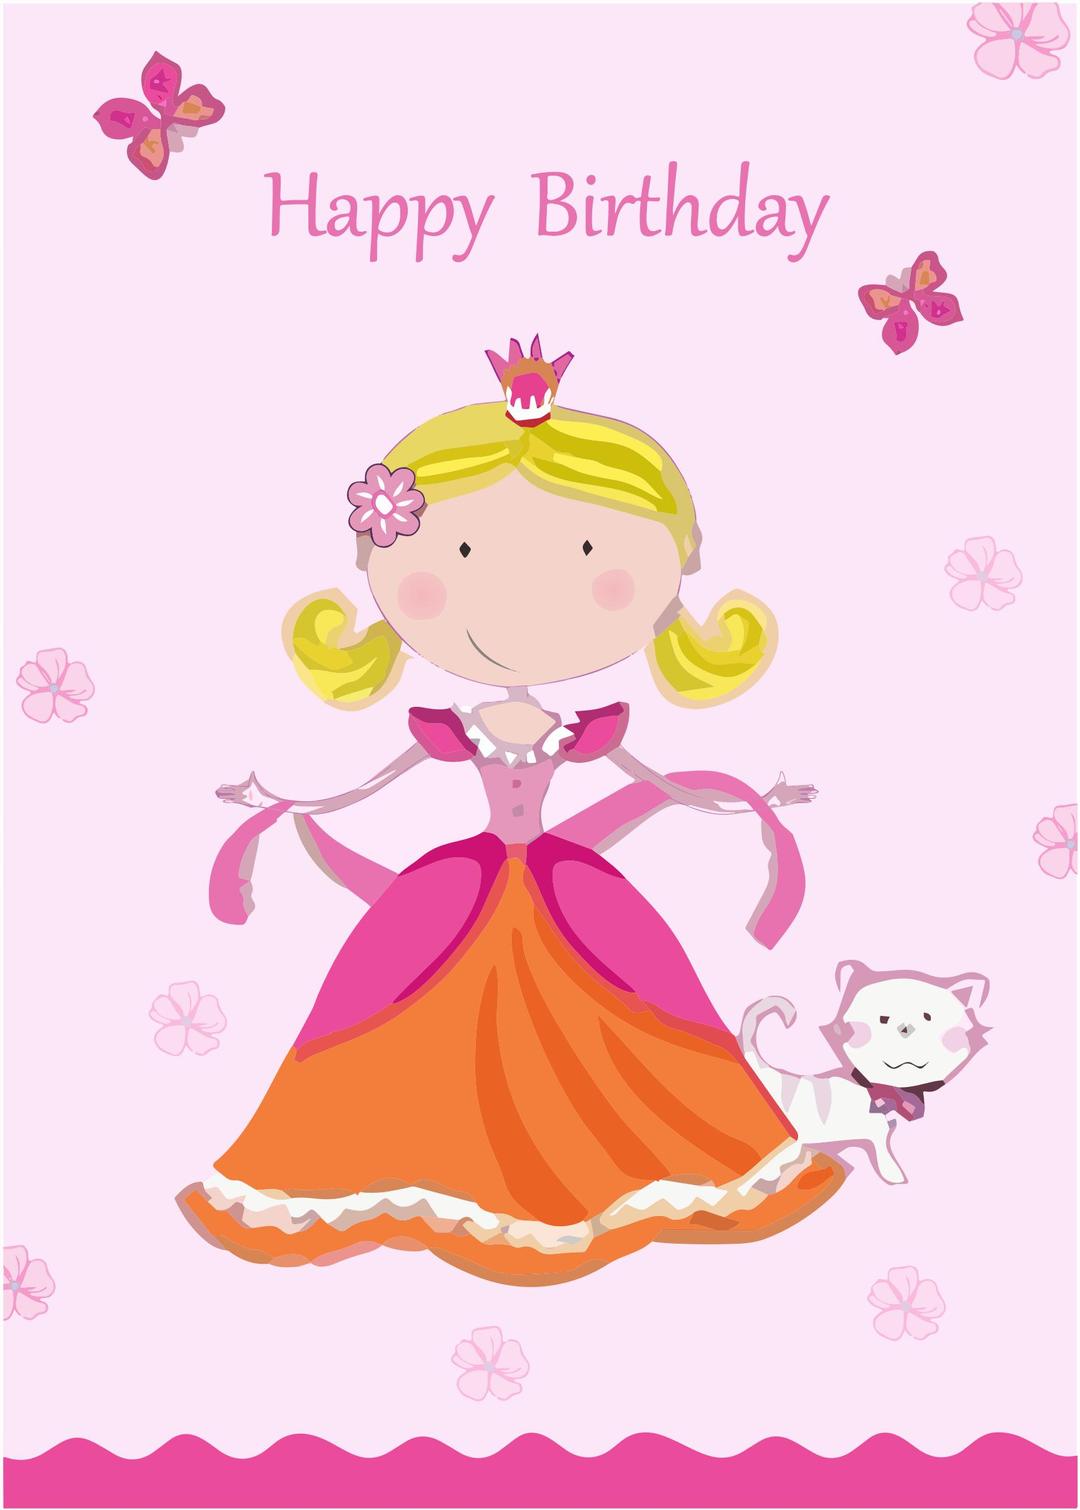 Happy Birthday Card png transparent